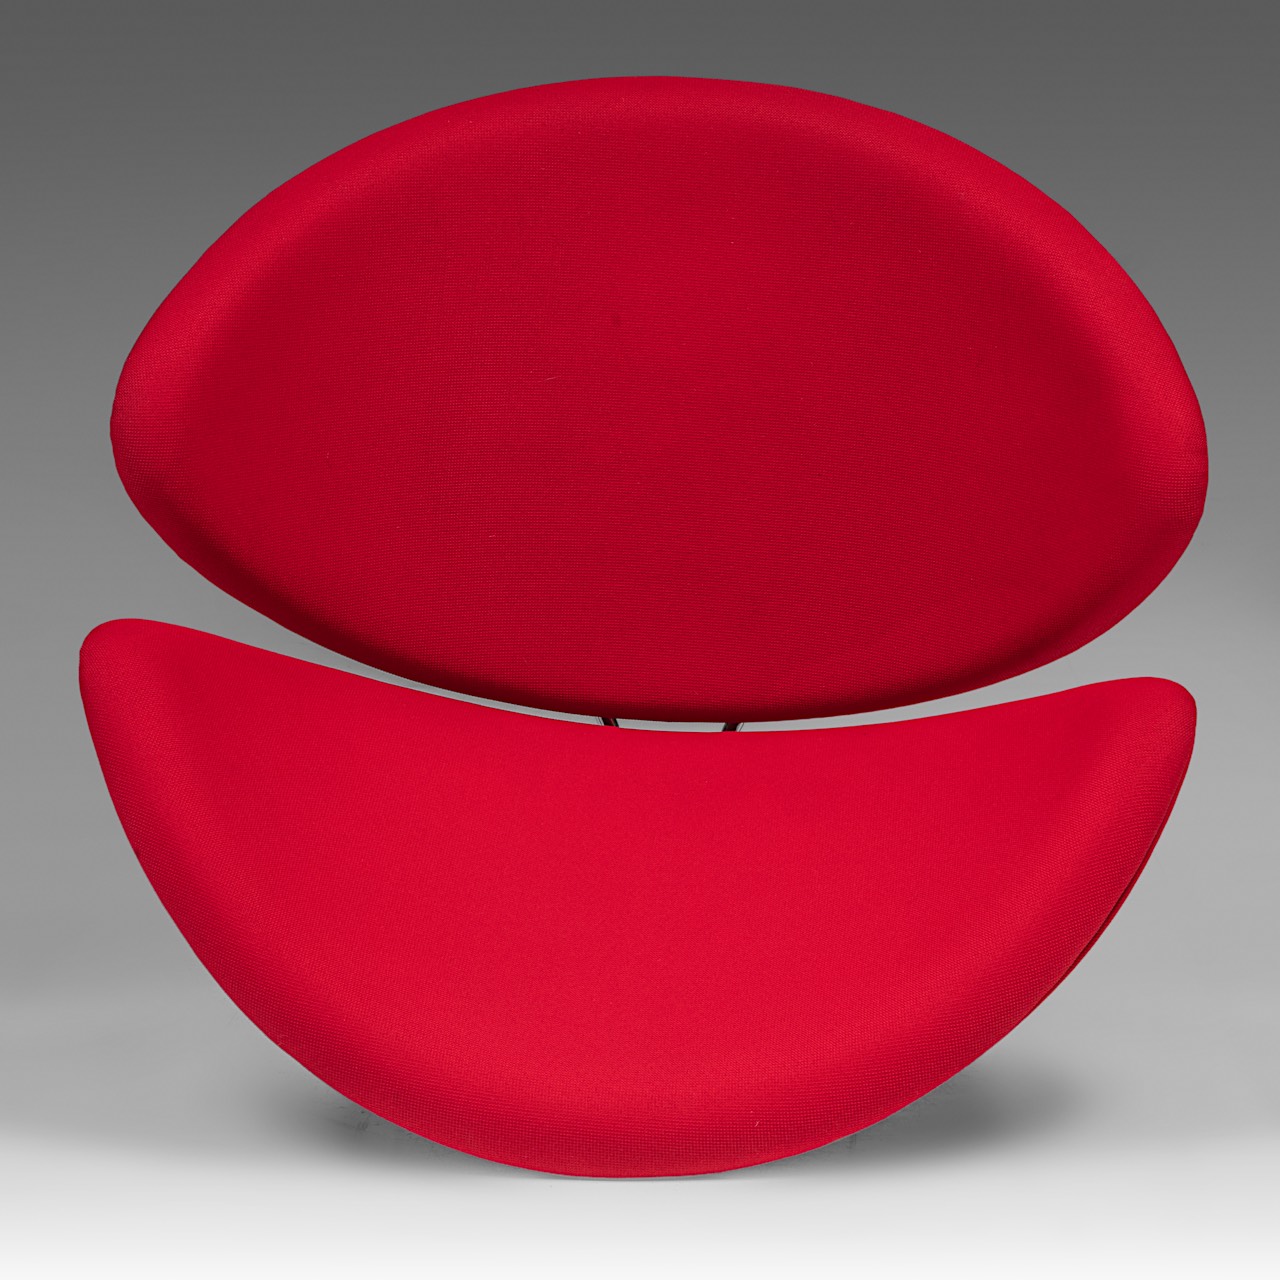 An Orange Slice chair by Pierre Pauline for Artifort, H 85 - W 82 cm - Image 7 of 9